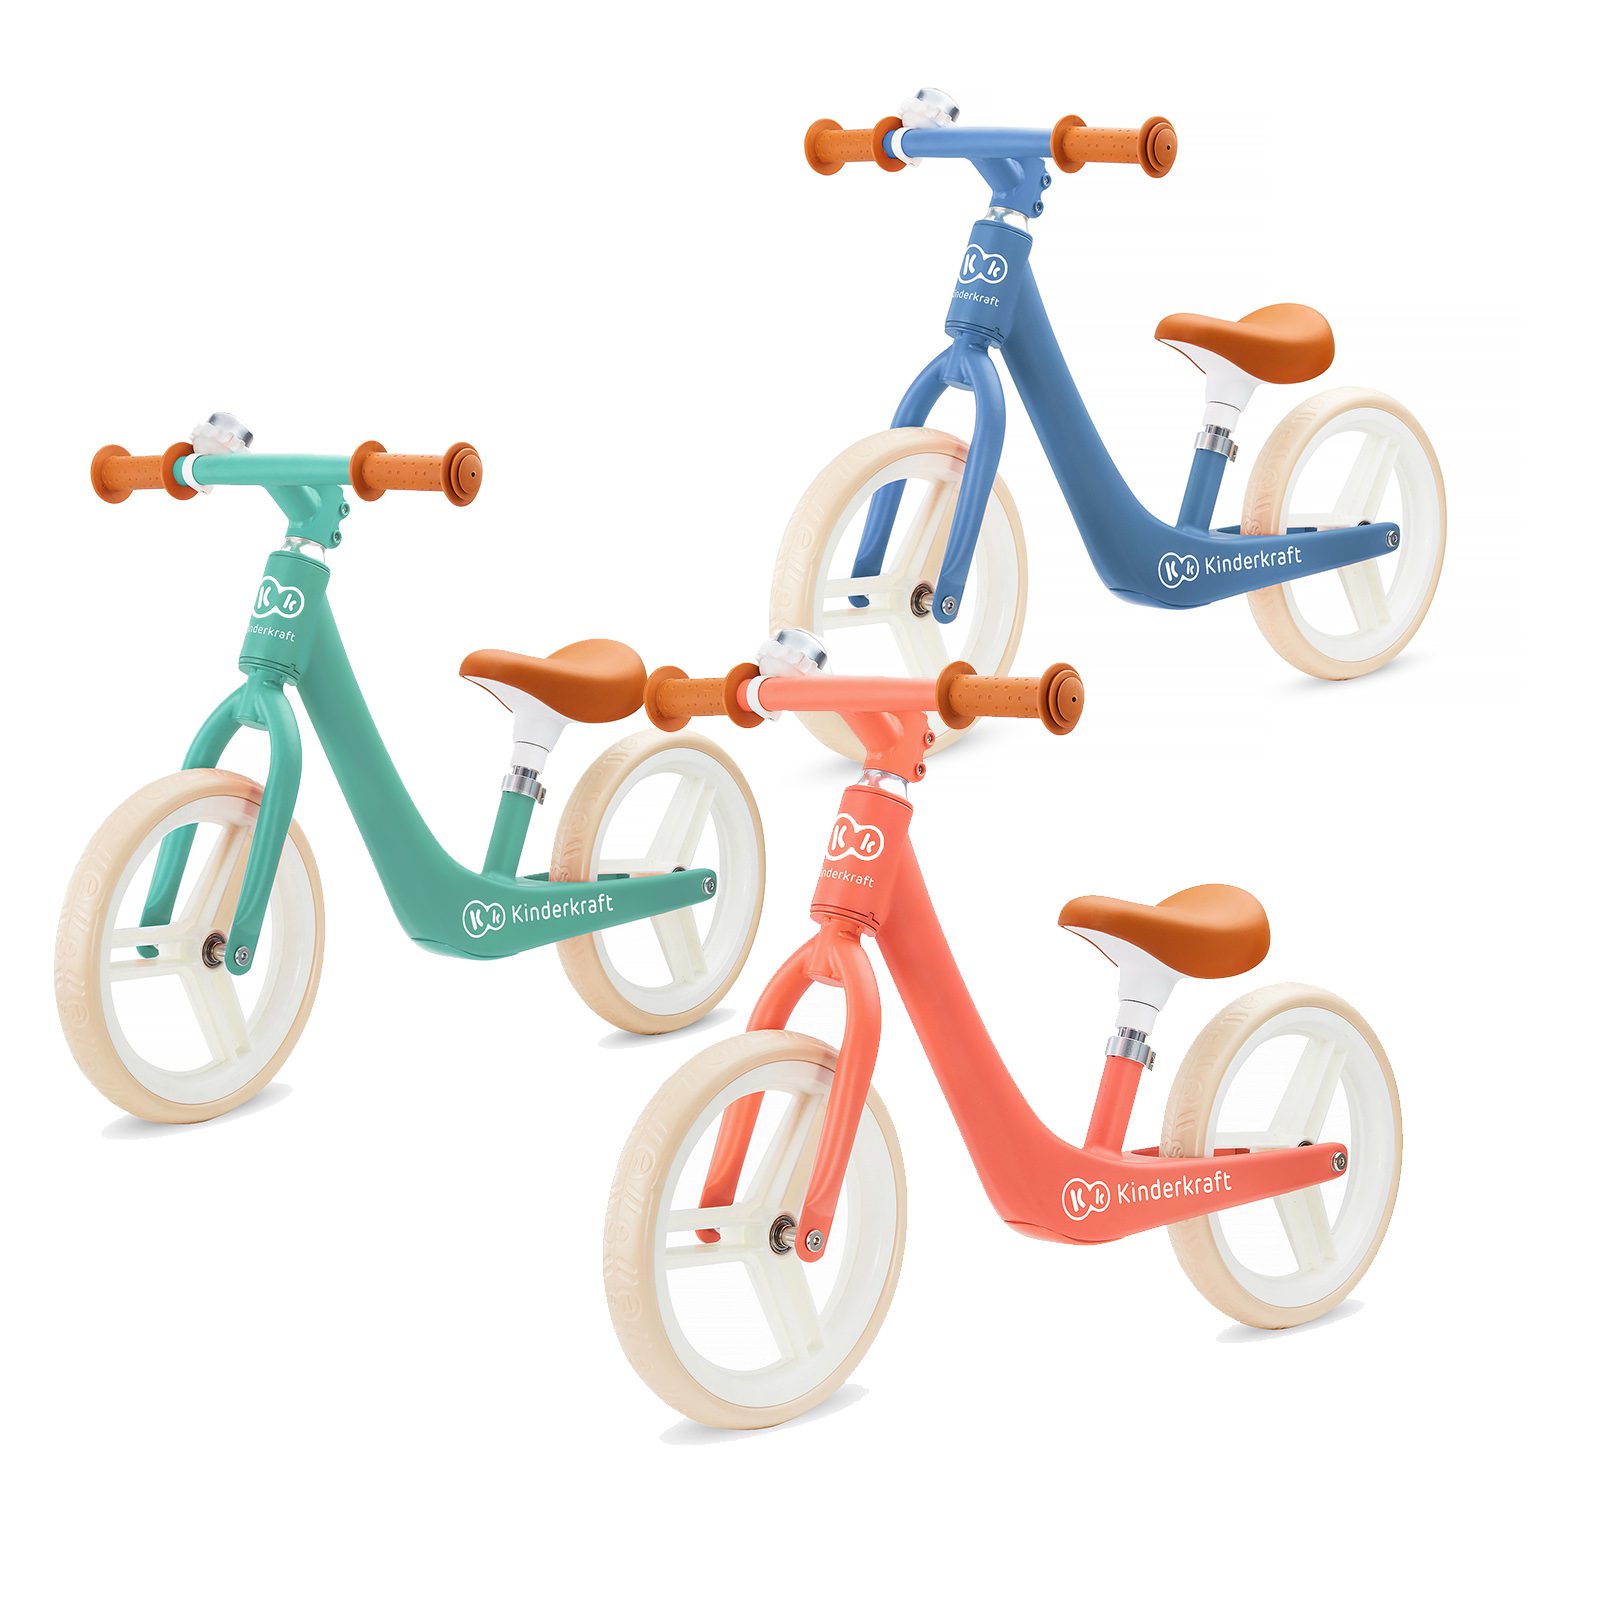 Quick, lightweight and easy to manoeuvre – the FLY PLUS balance bike has them all! 